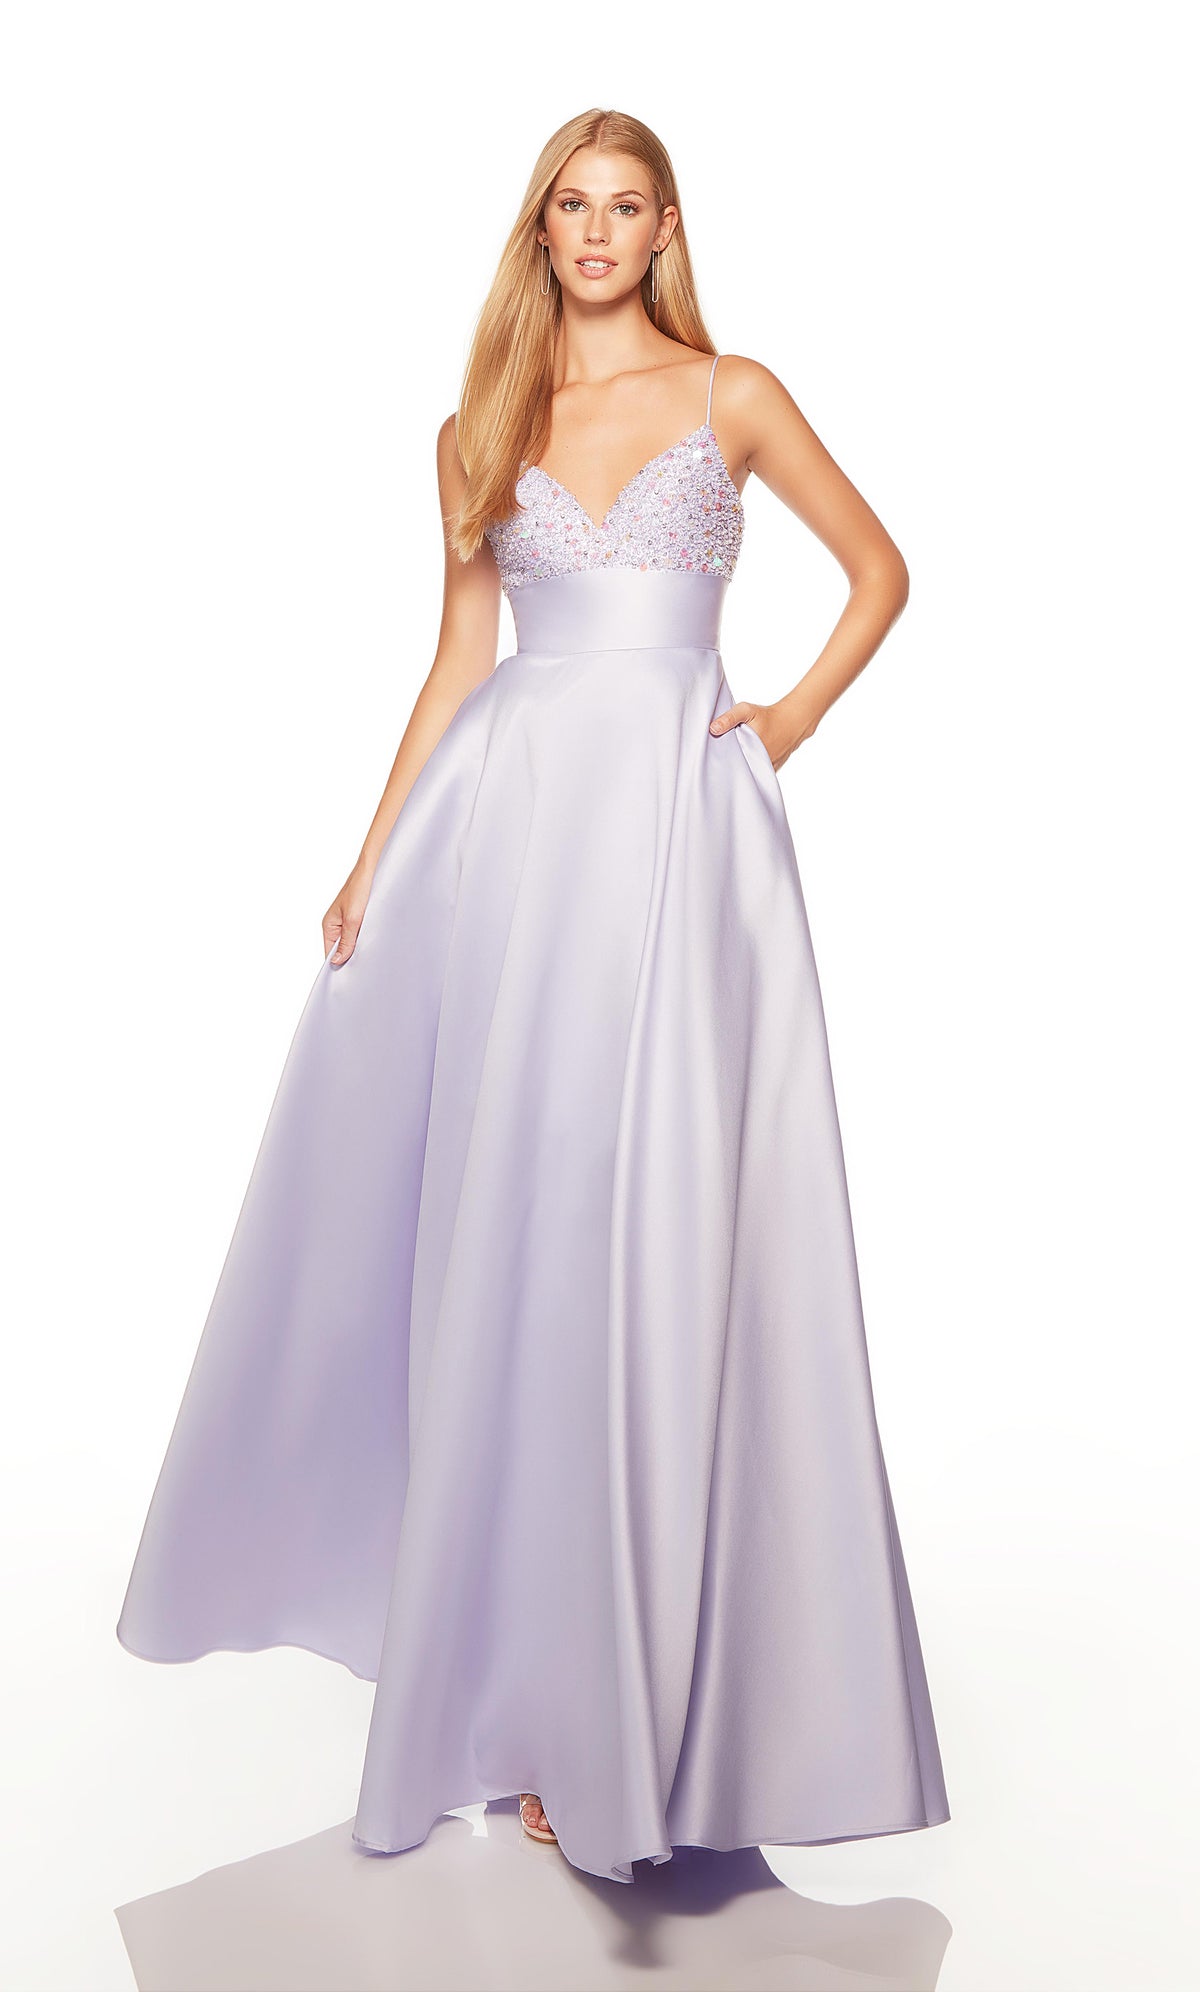 Long pretty prom dress with a sweetheart neckline, beaded bodice, and pockets in lilac purple color. COLOR-SWATCH_1763__ICE-LILAC